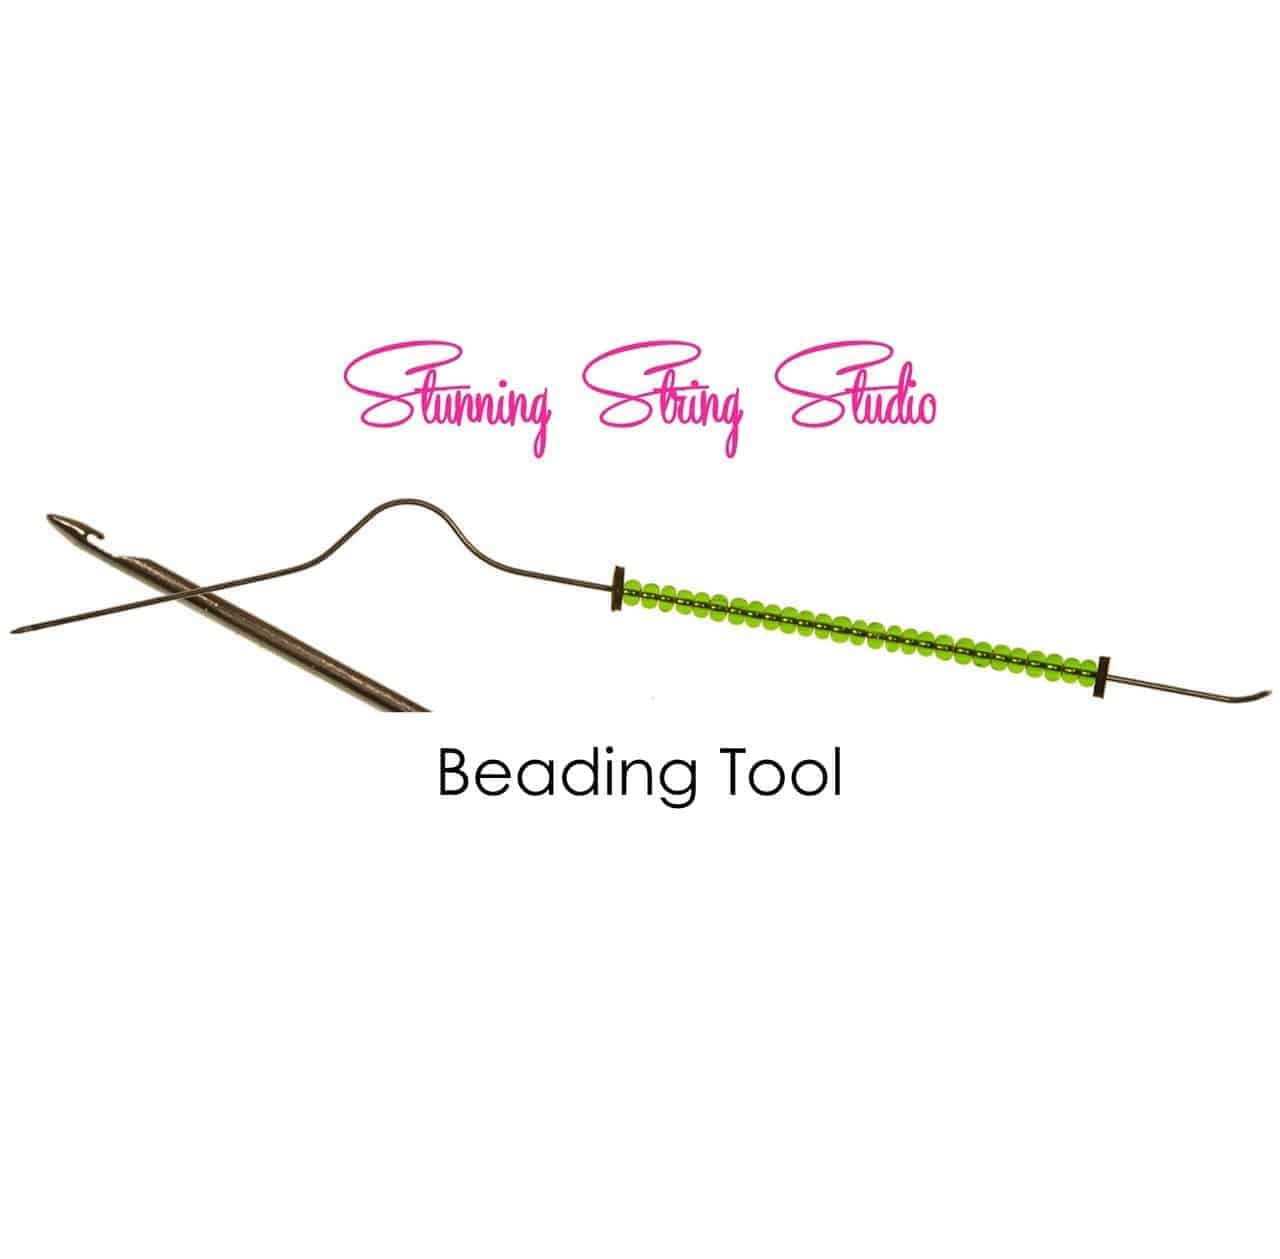 https://www.stunningstring.com/wp-content/uploads/1970/01/products-StSt_Beading_Tool__25187.1530718832.1280.1280.jpg